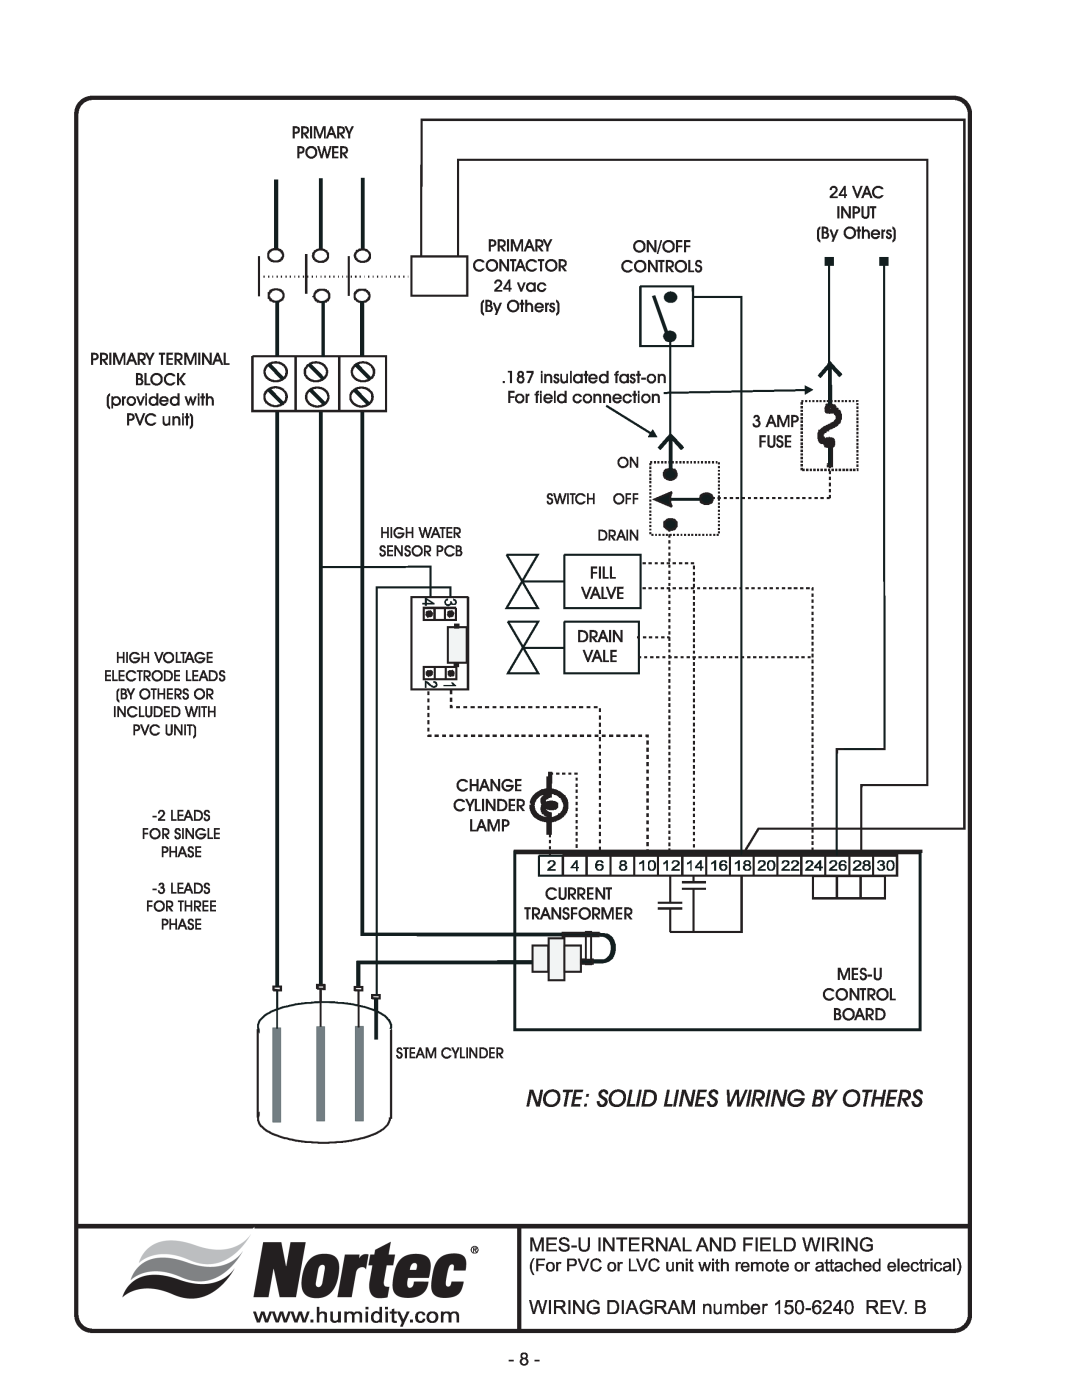 Nortec Industries MES-U manual Note Solid Lines Wiring By Others, Mes-Uinternal And Field Wiring 